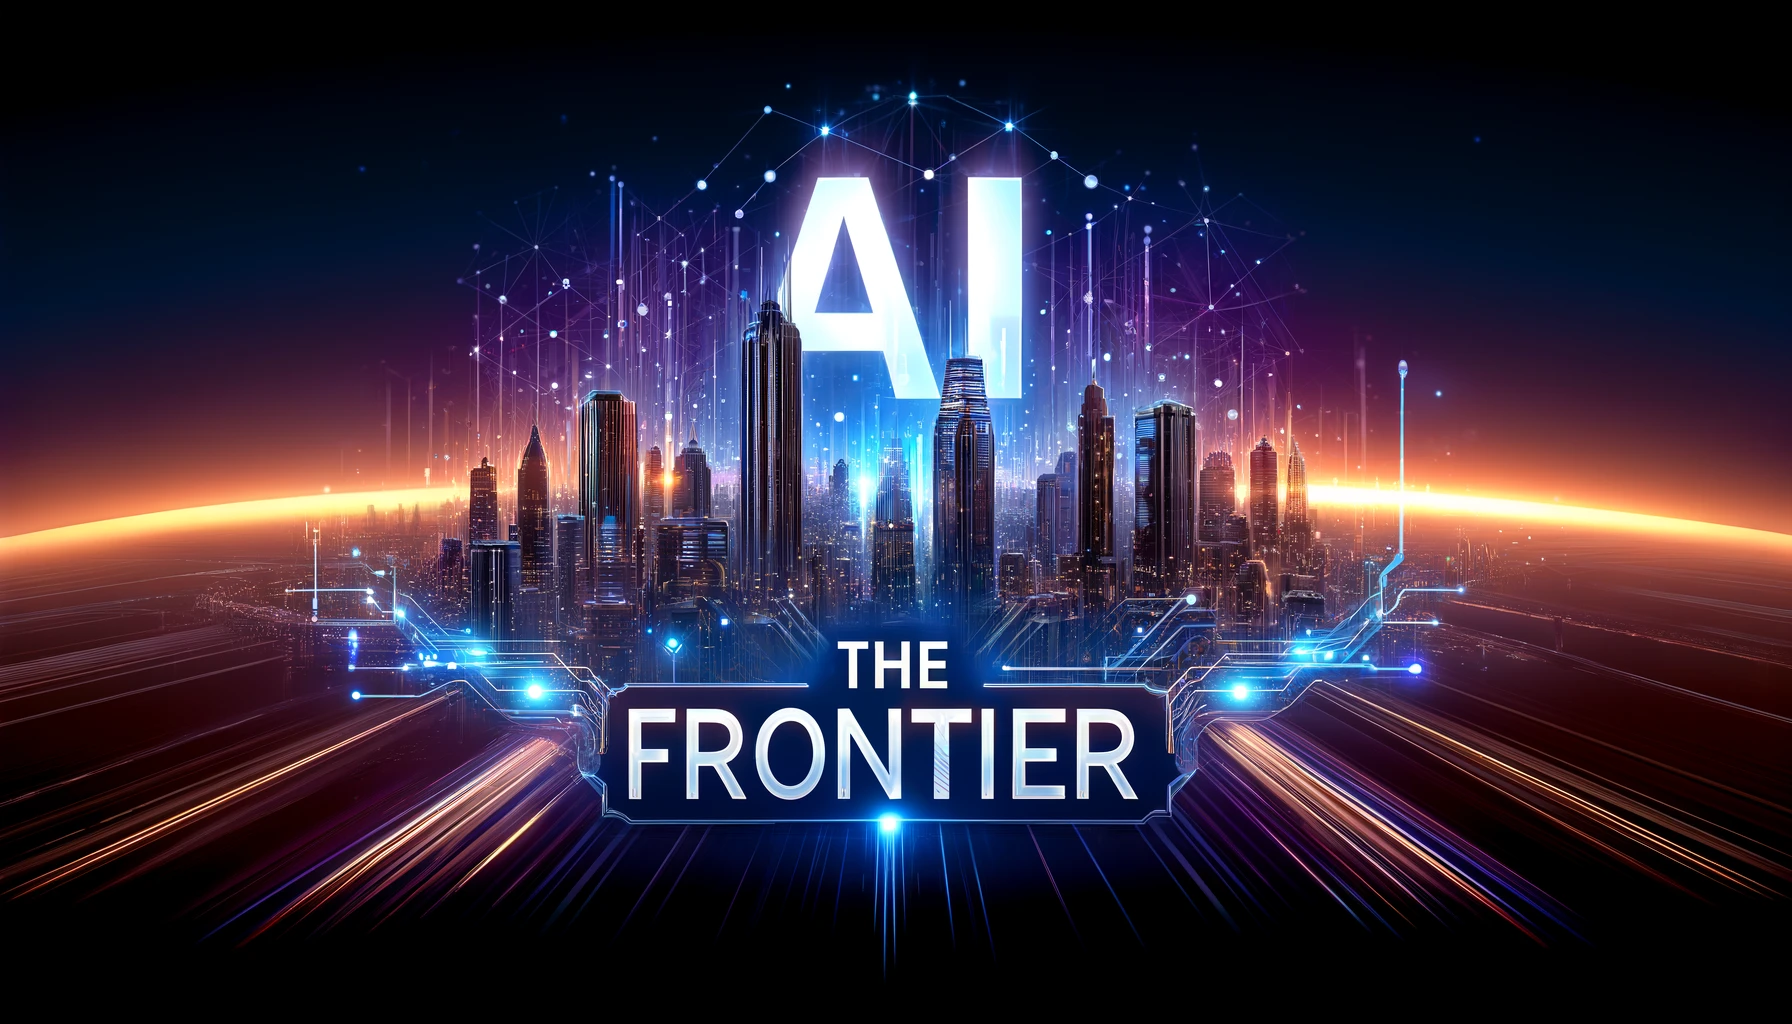 The AI Frontier